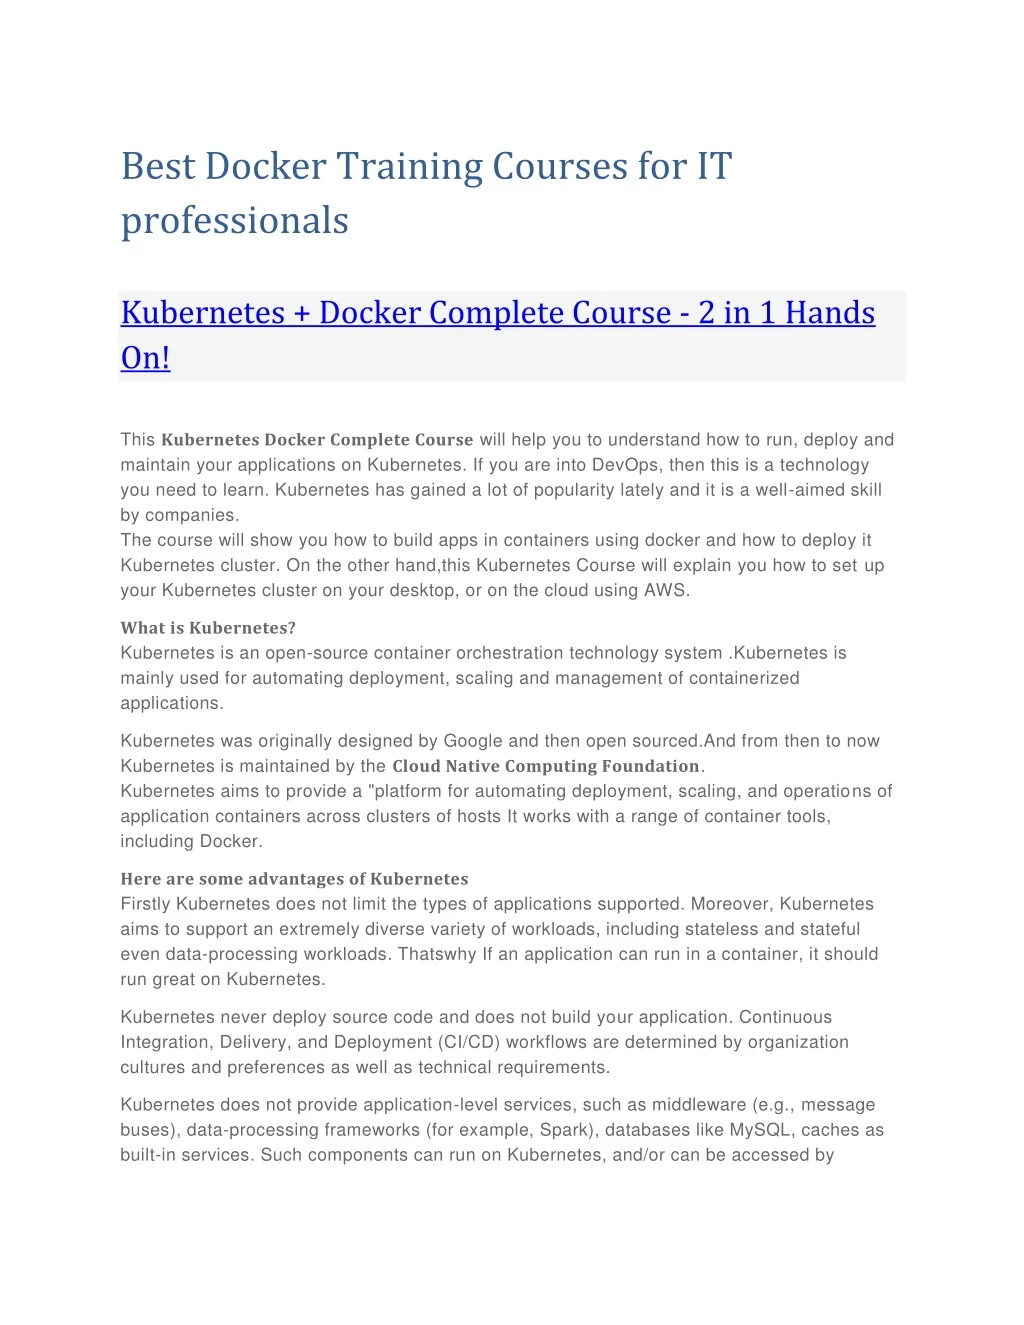 best docker training courses for it professionals